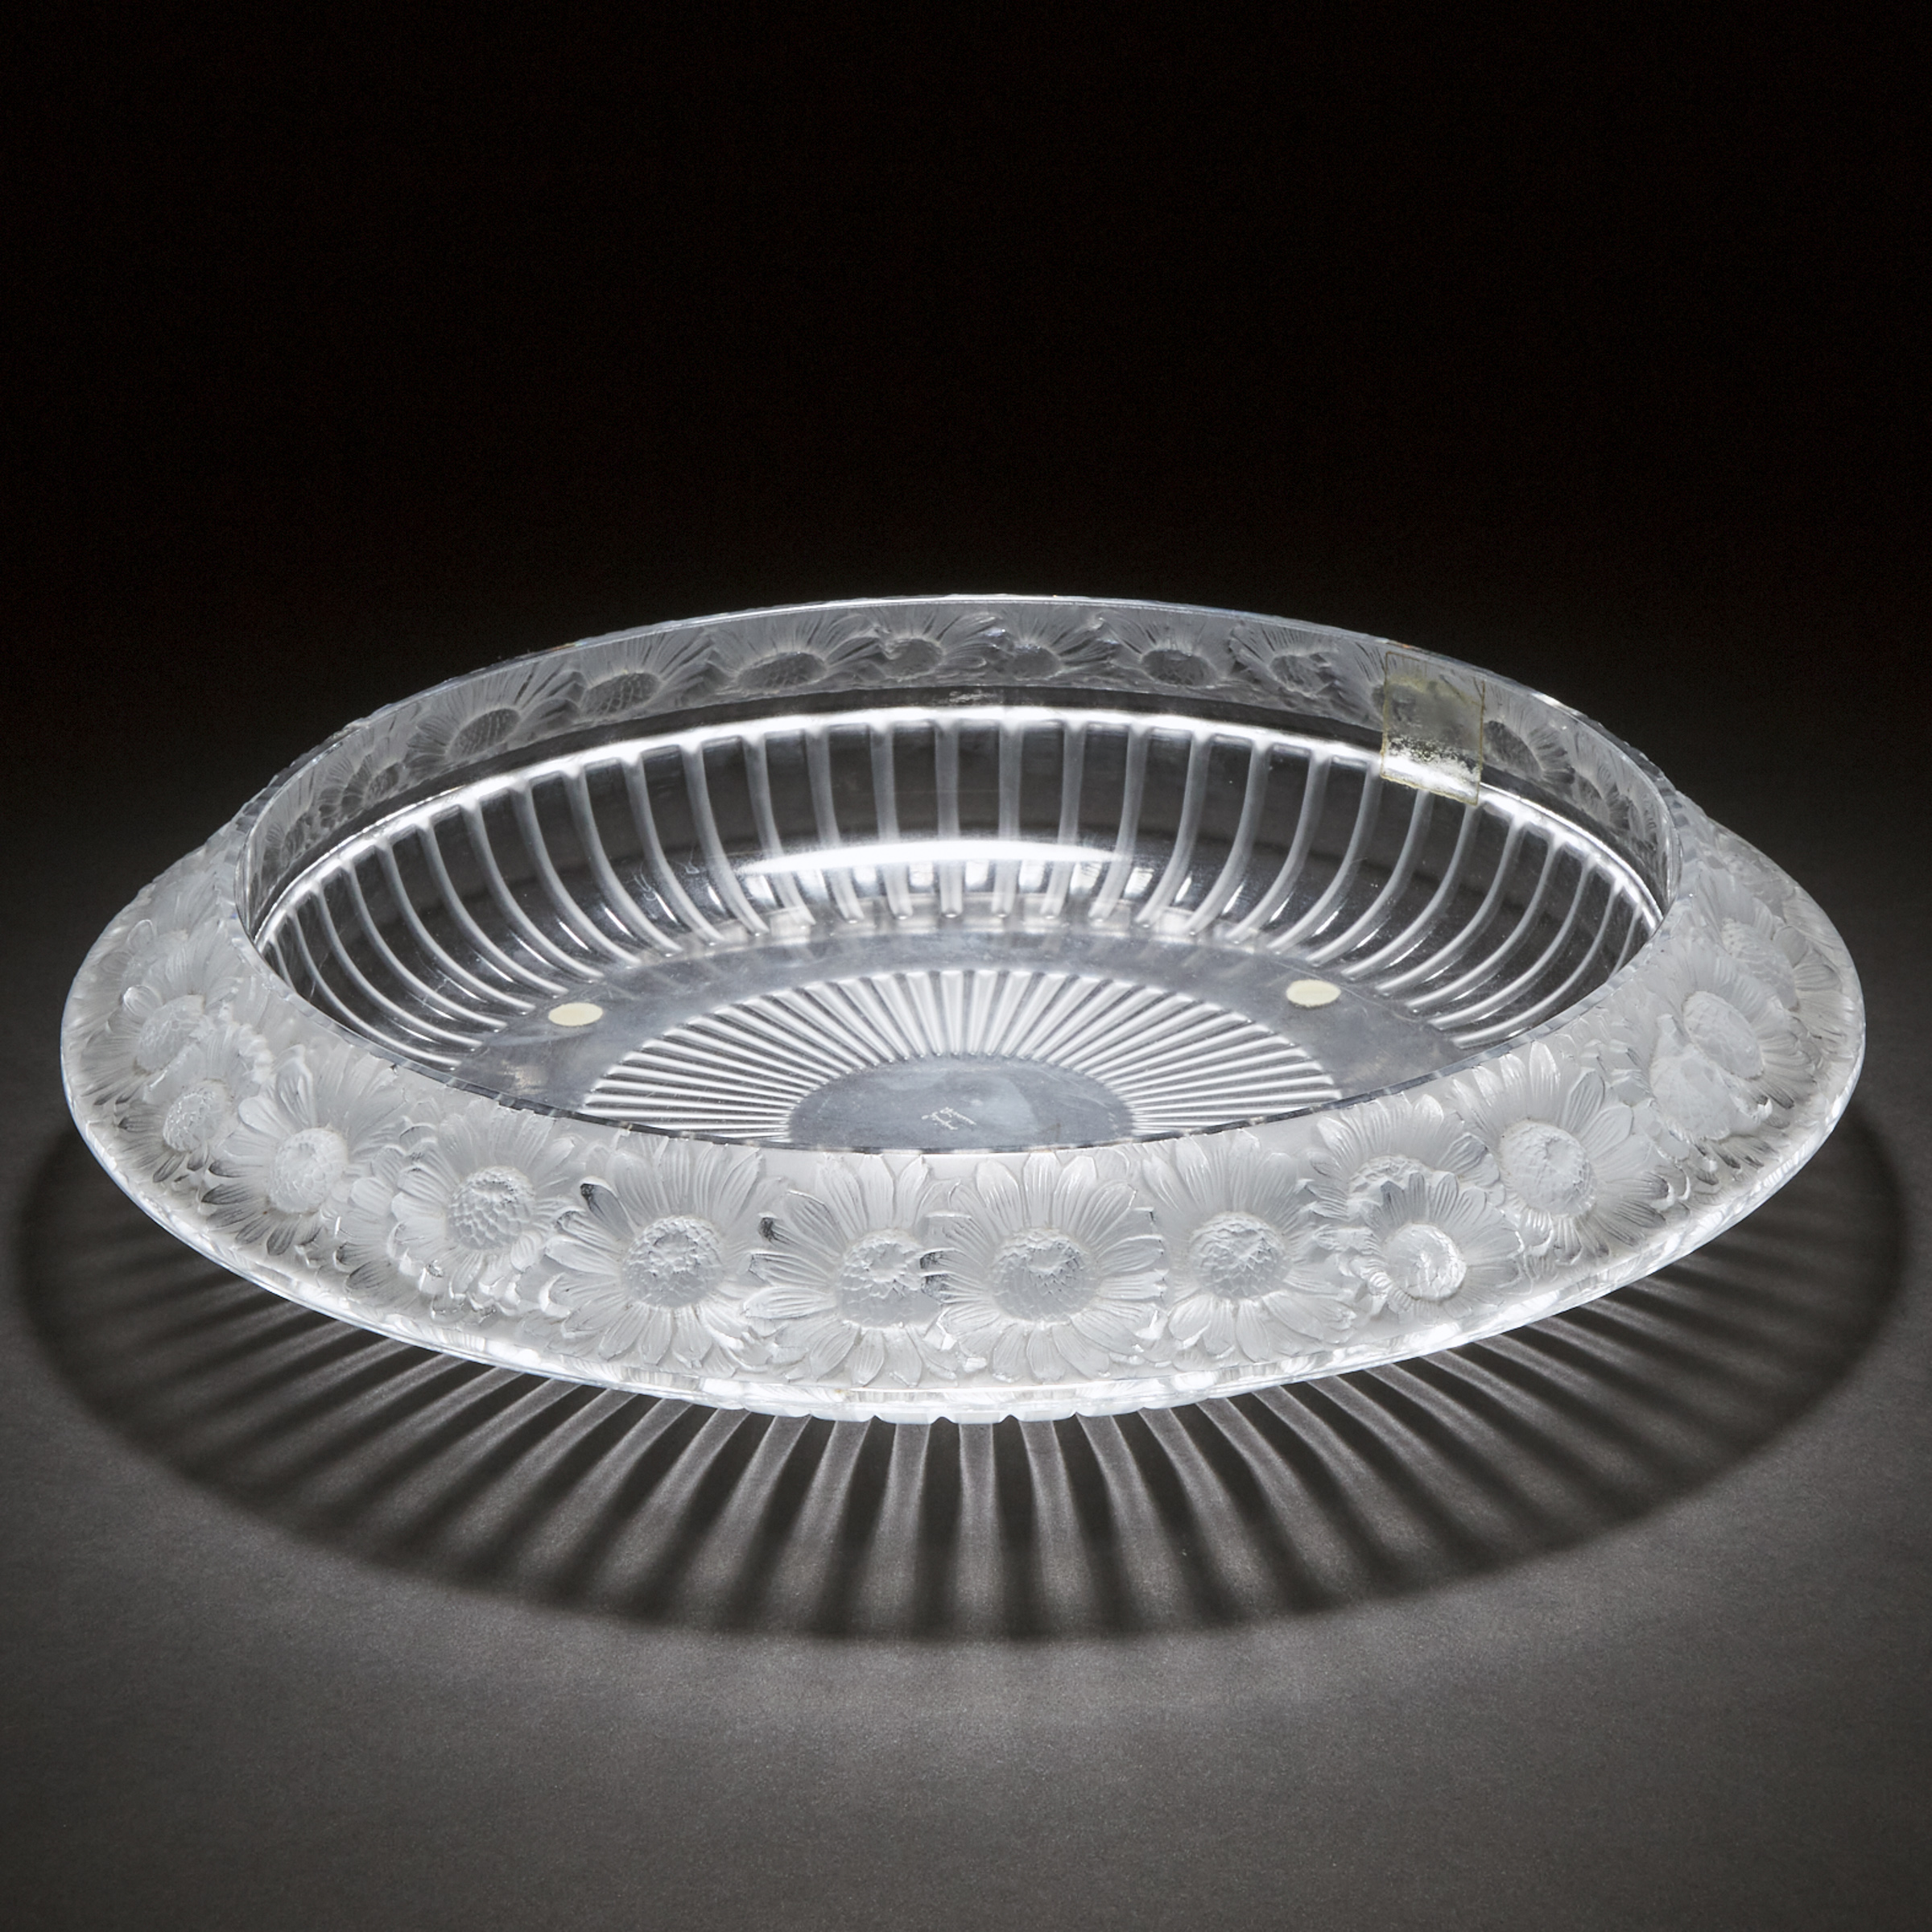 'Marguerites', Lalique Moulded and Frosted Glass Bowl, post-1945